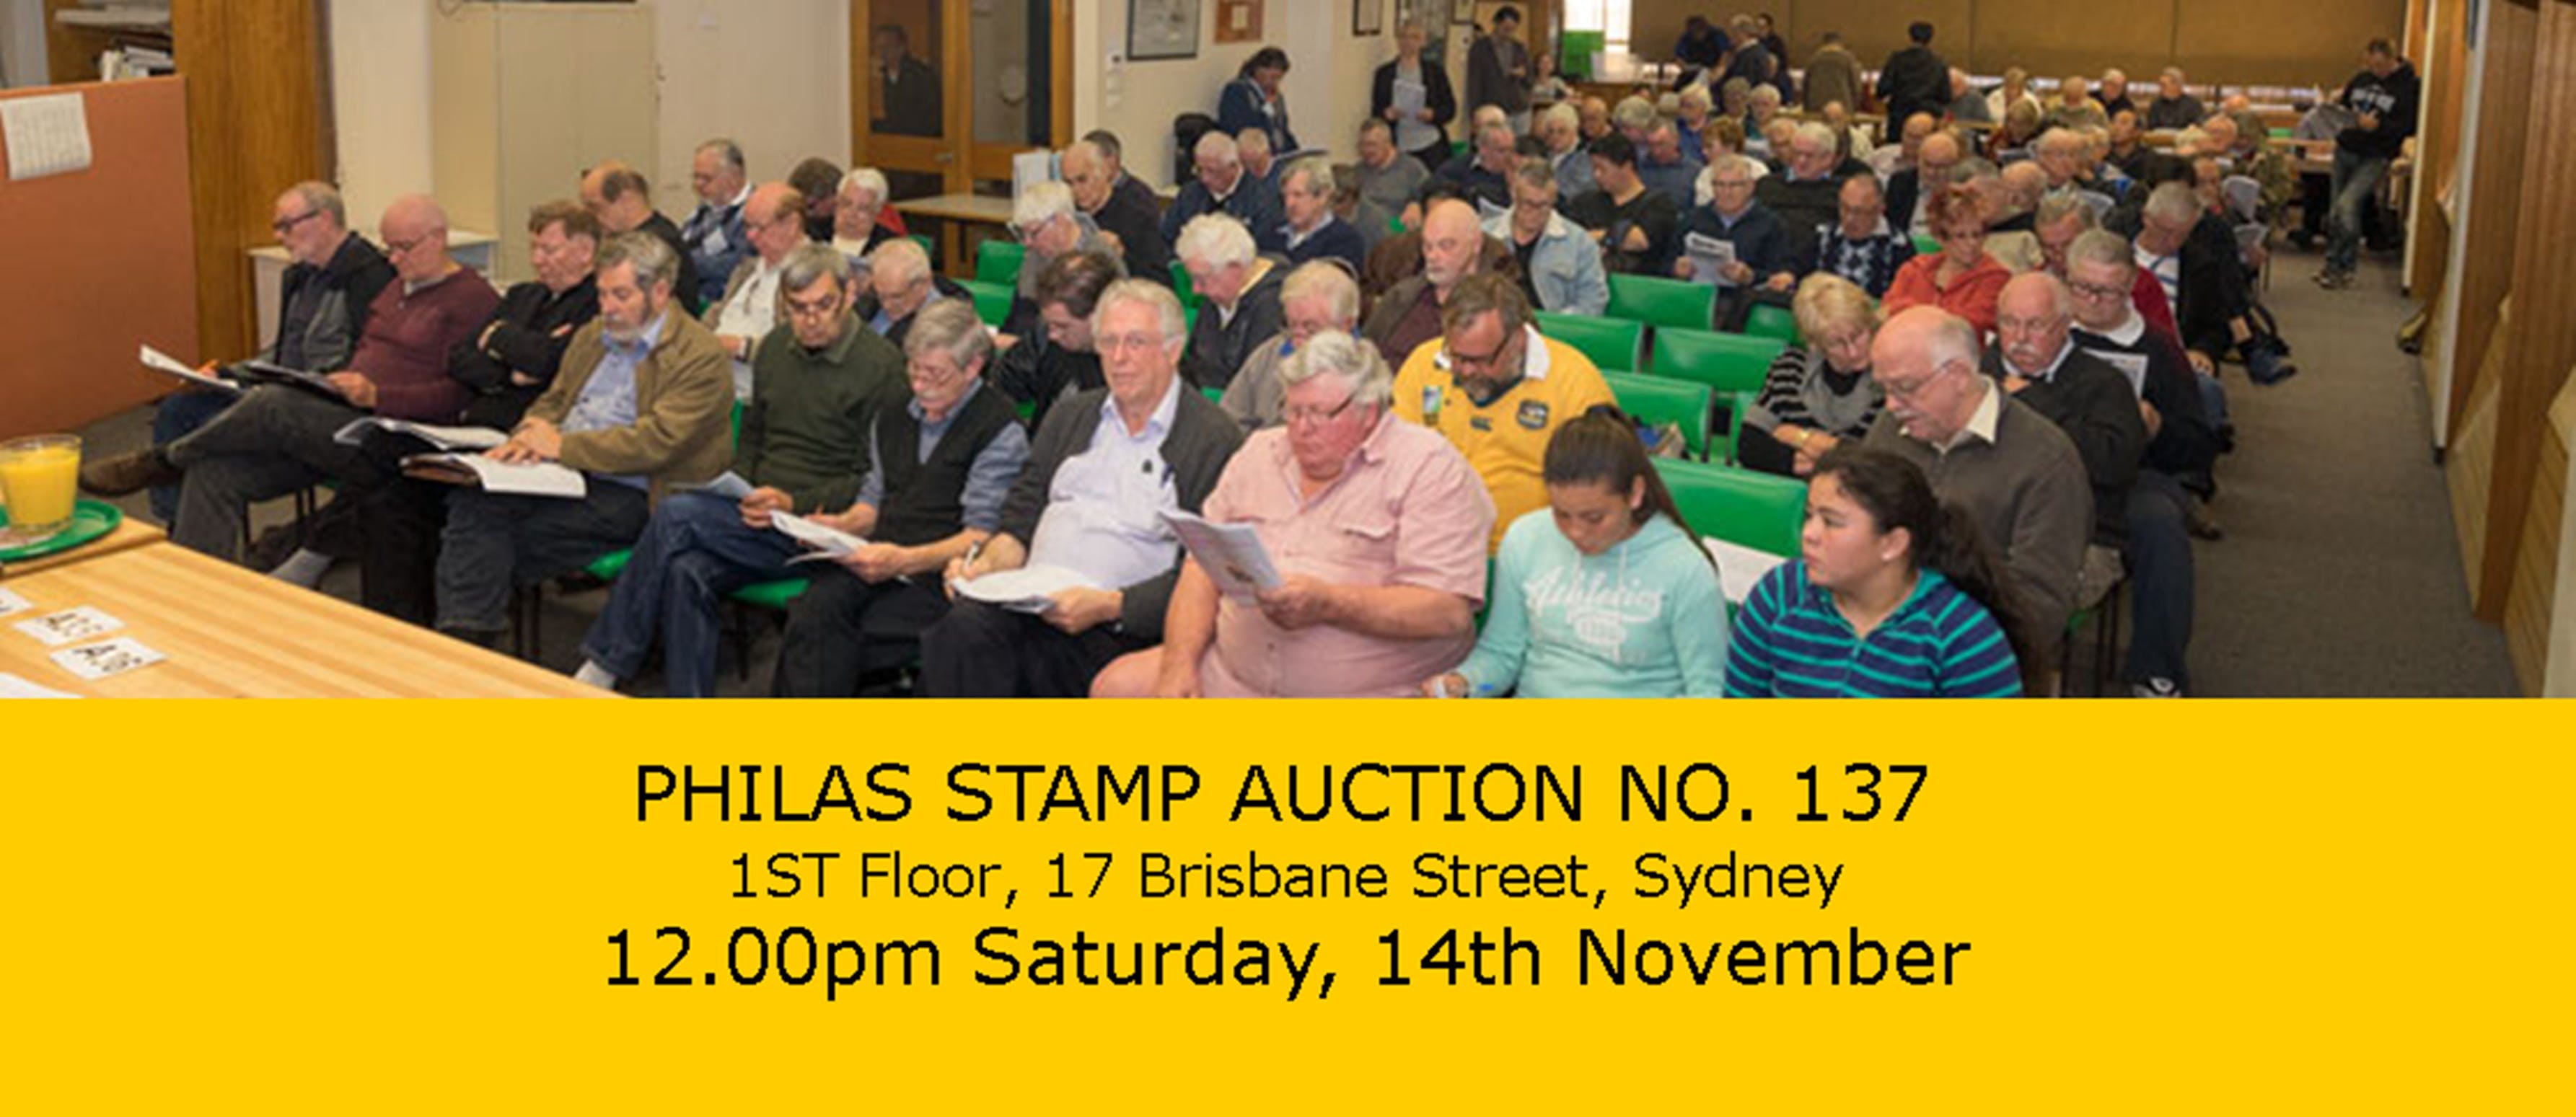 PHILAS Stamp Auction No. 137 - thumb 1